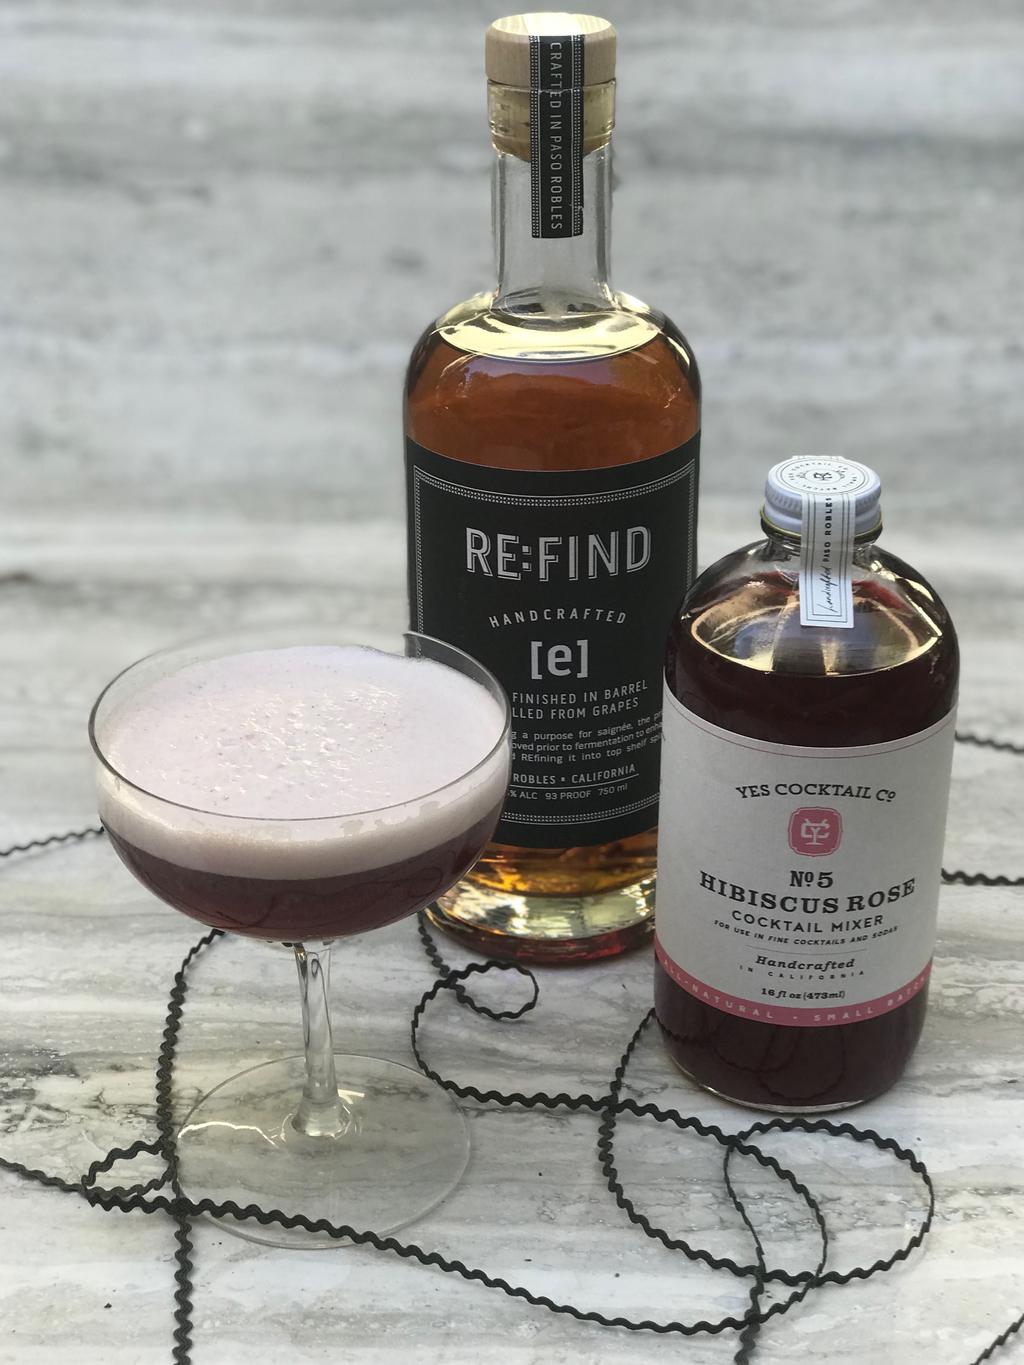 OUR FAVORITE RECIPES: hibiscus rose: Wild hibiscus sour: 1 oz hibiscus rose mixer 2 oz rye whiskey 1/2 oz lemon juice 1 egg white combine all ingredients in a shaker.